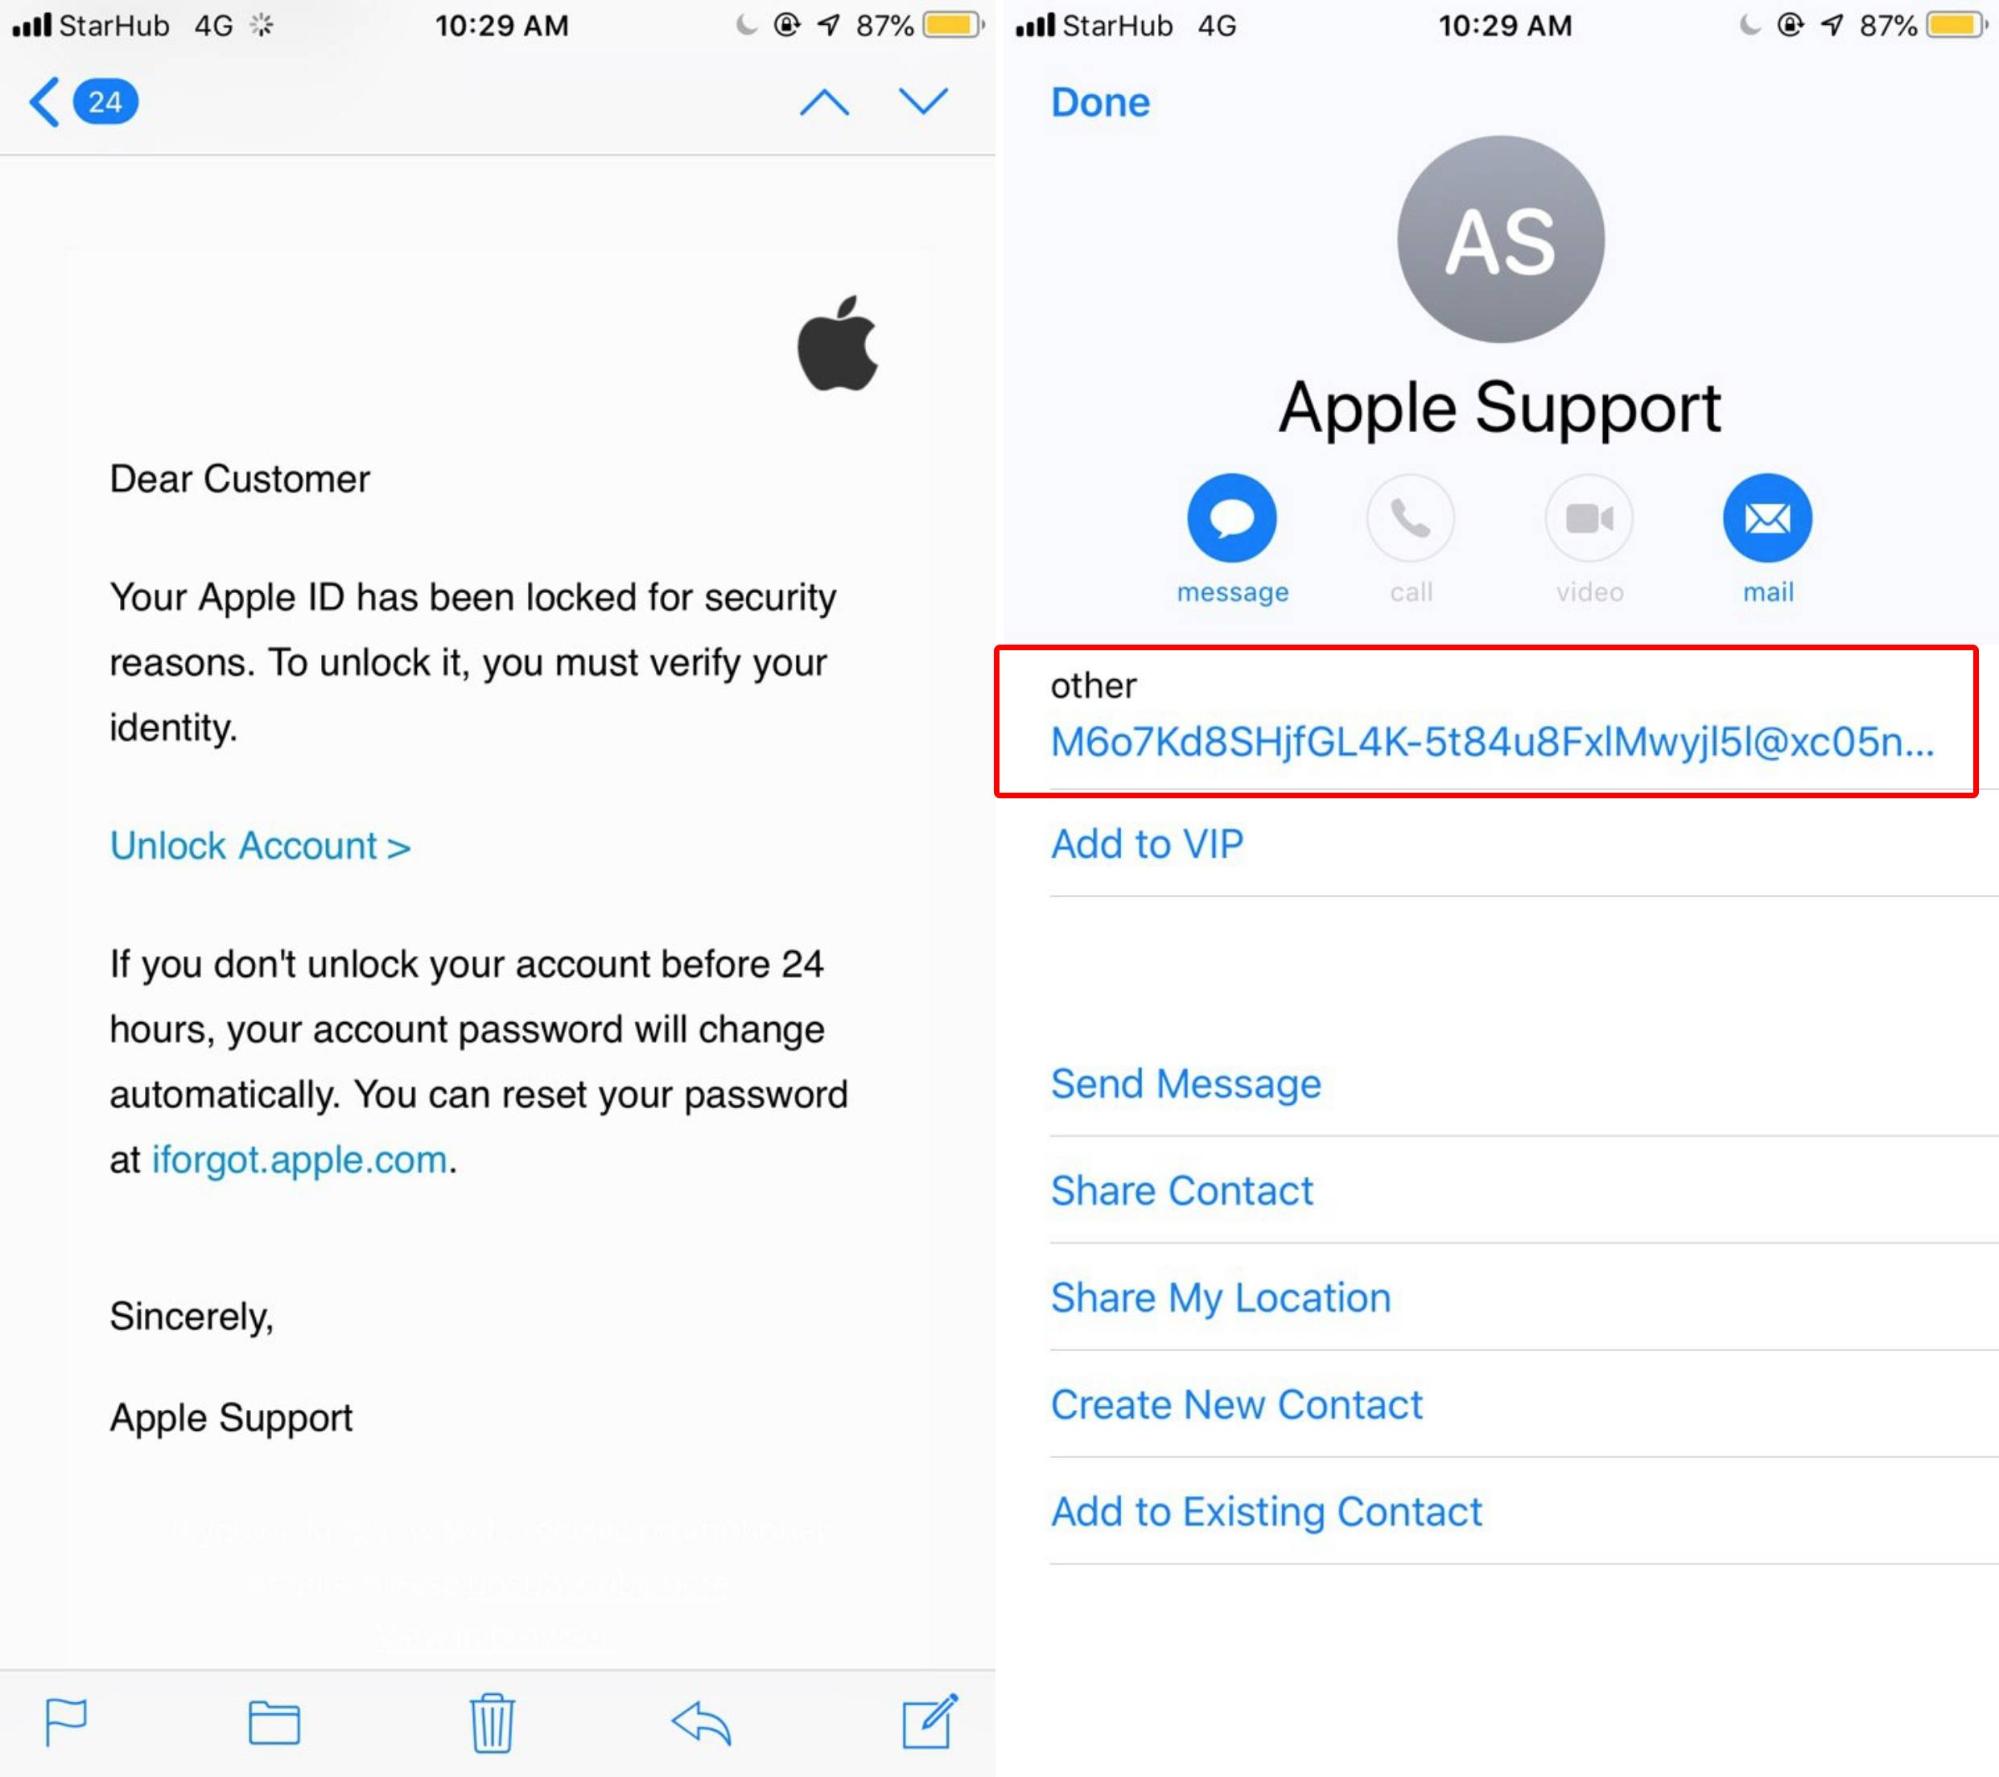 common scams in Singapore - fake Apple support emails 